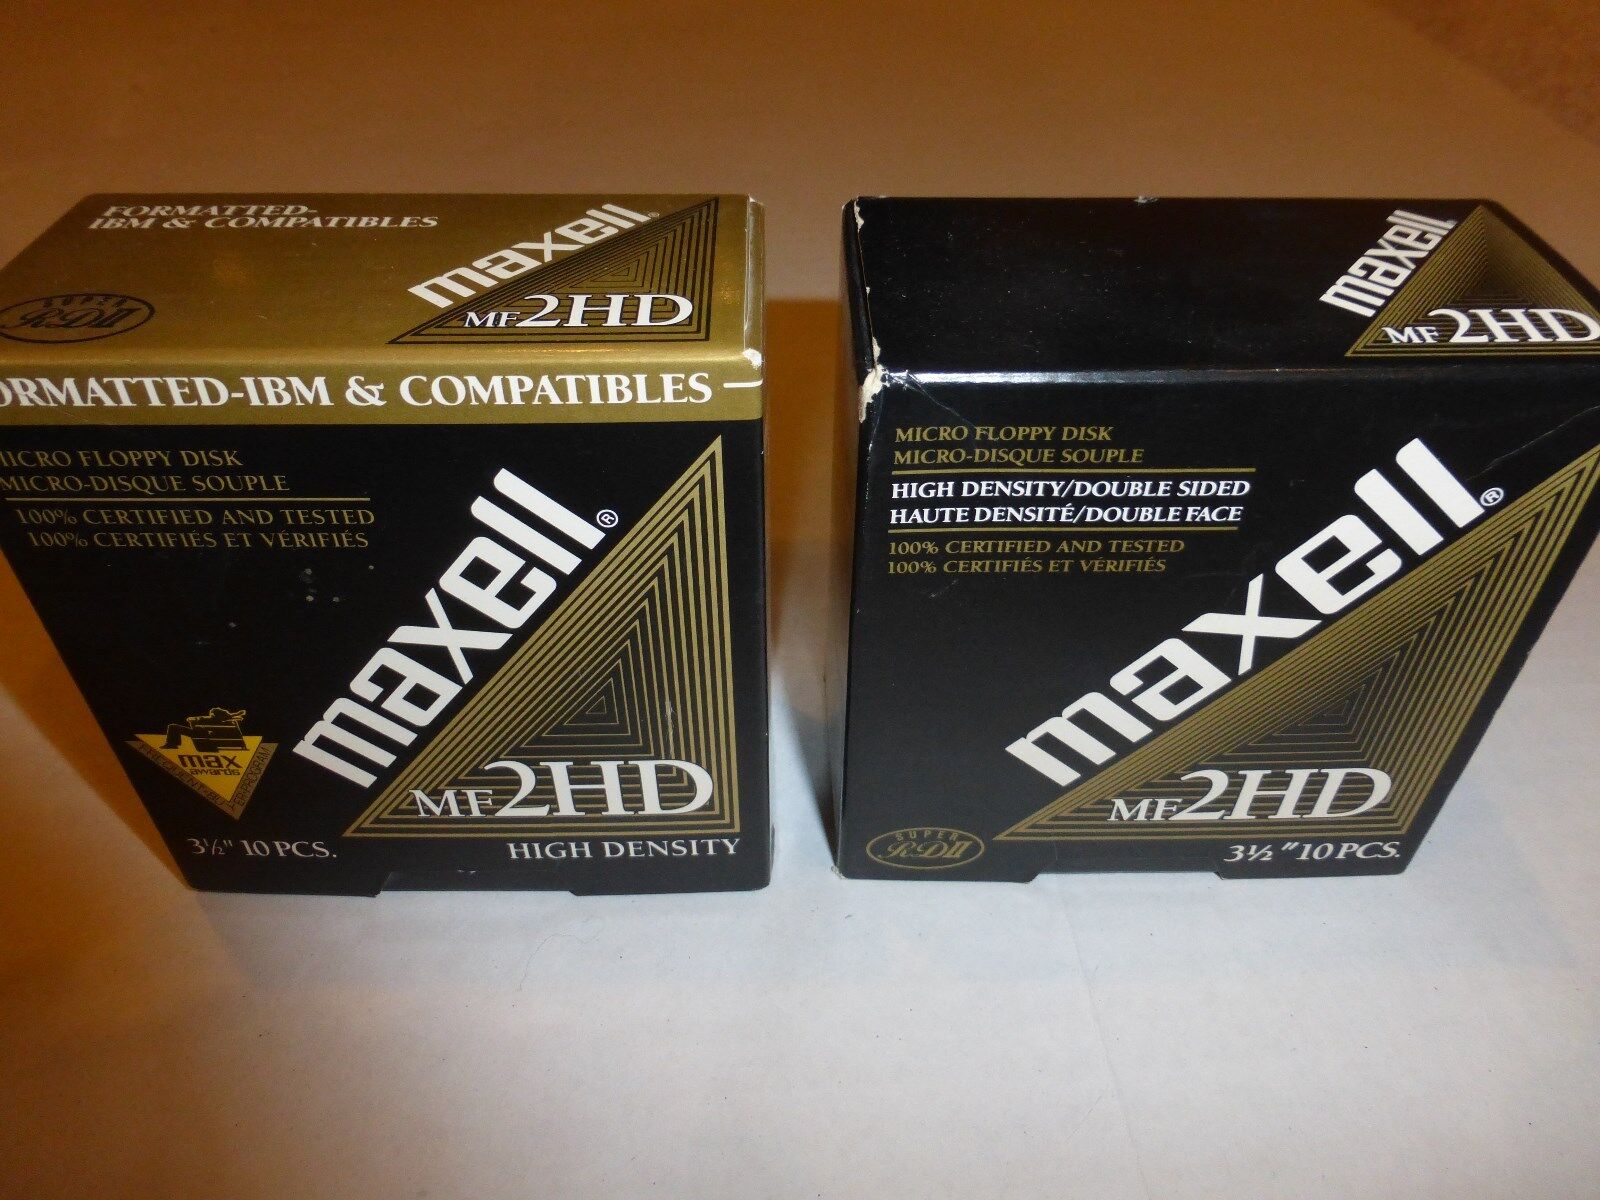 New Lot of 2 box Maxell MF2HD 3.5” Micro Floppy Disk 17 pc Format IBM Compatible